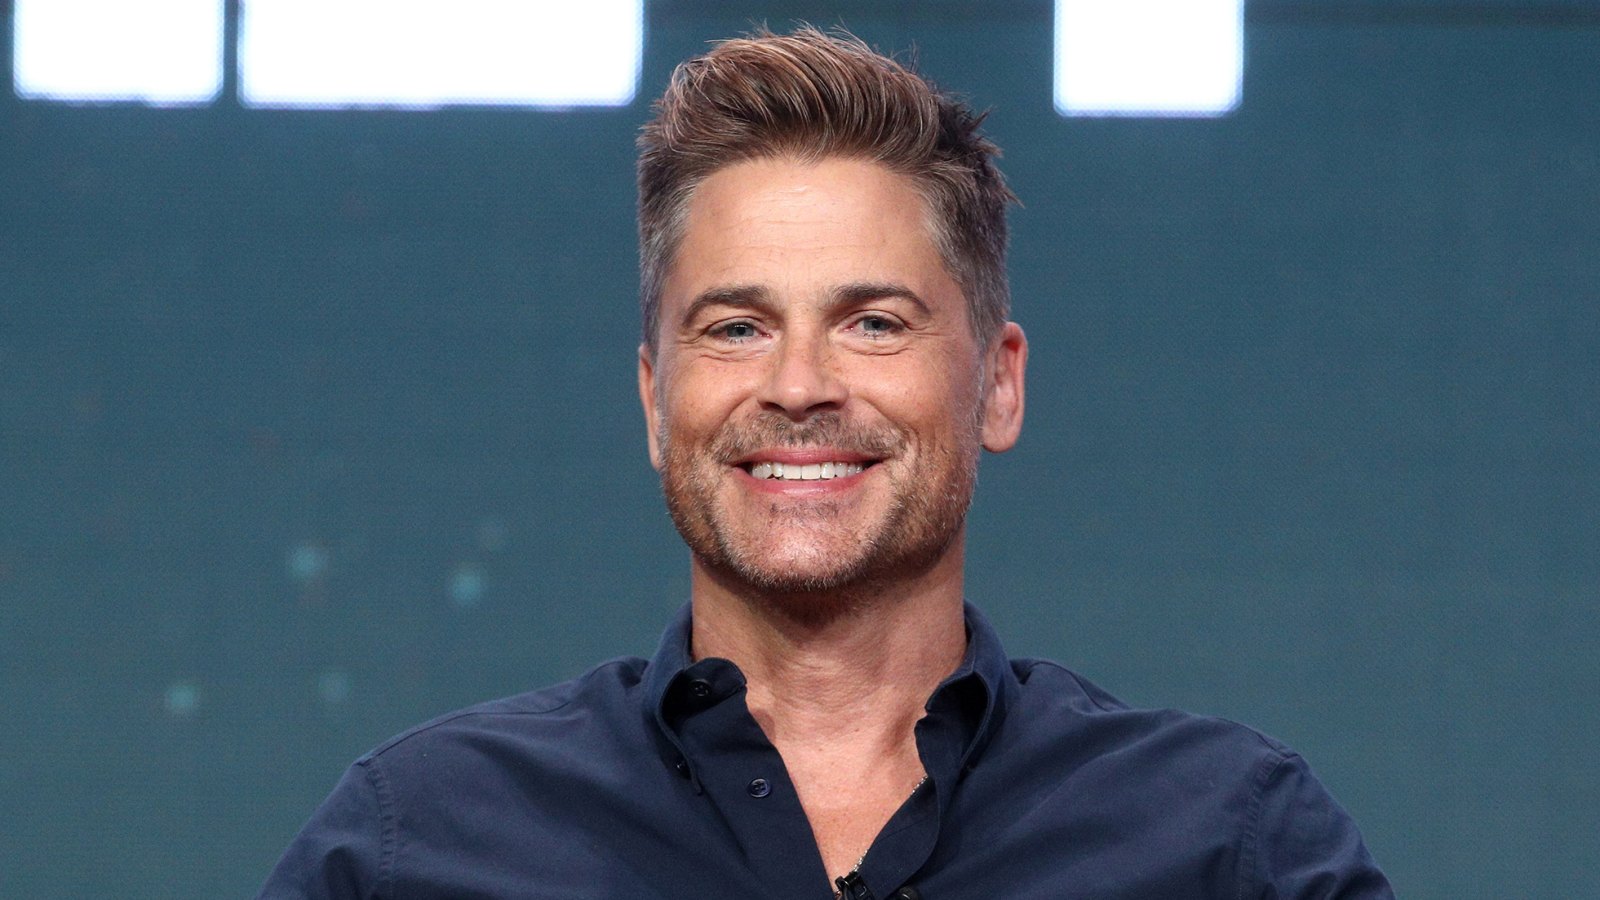 Rob Lowe Jokes Turning Down McDreamy Role: It ‘Probably Cost Me $70 Million’